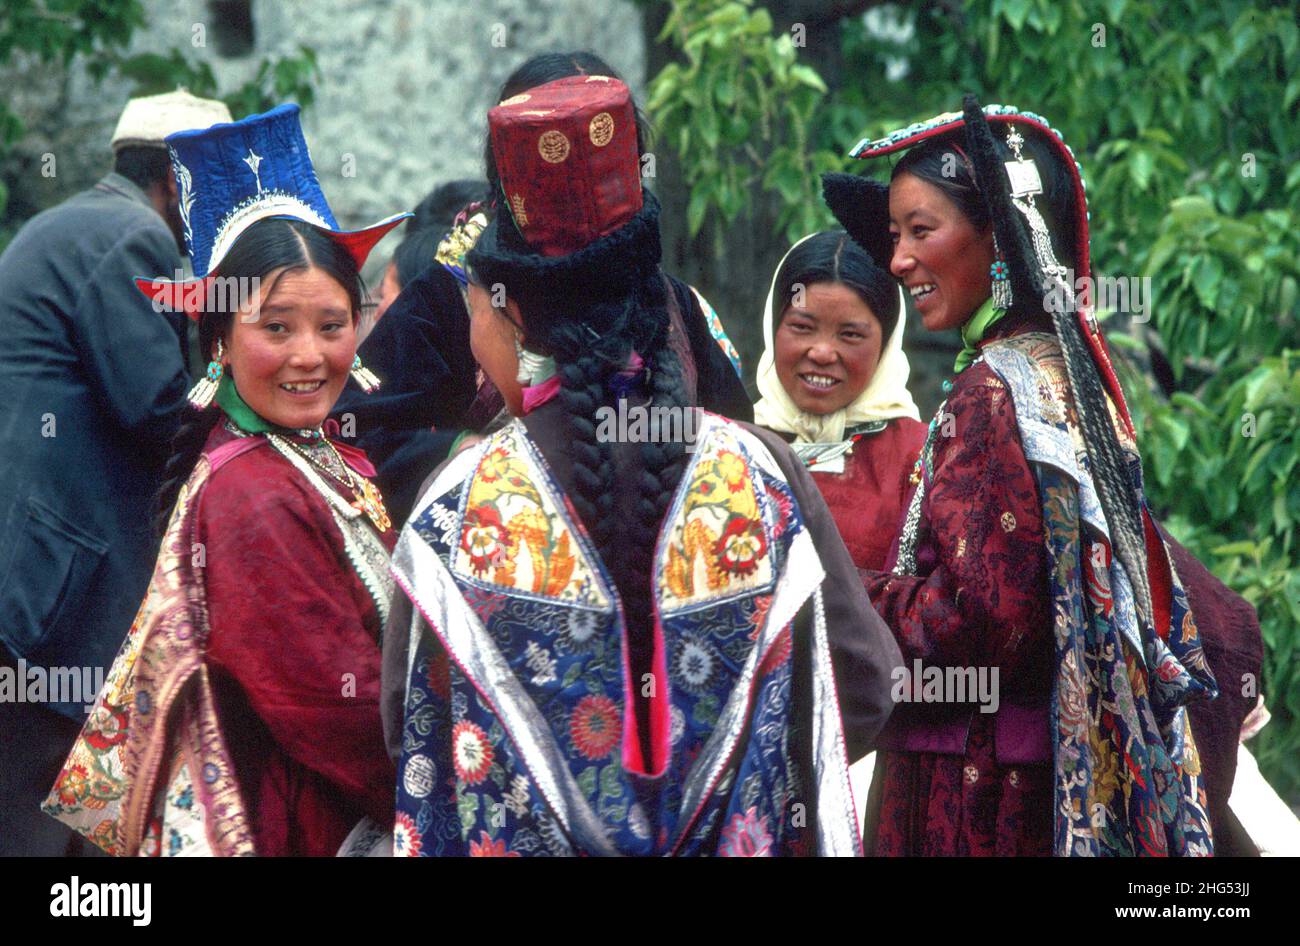 A group of happy Ladakhi women in their colourful traditional finery at a festival in Thiksay, Ladakh. N. India Stock Photo